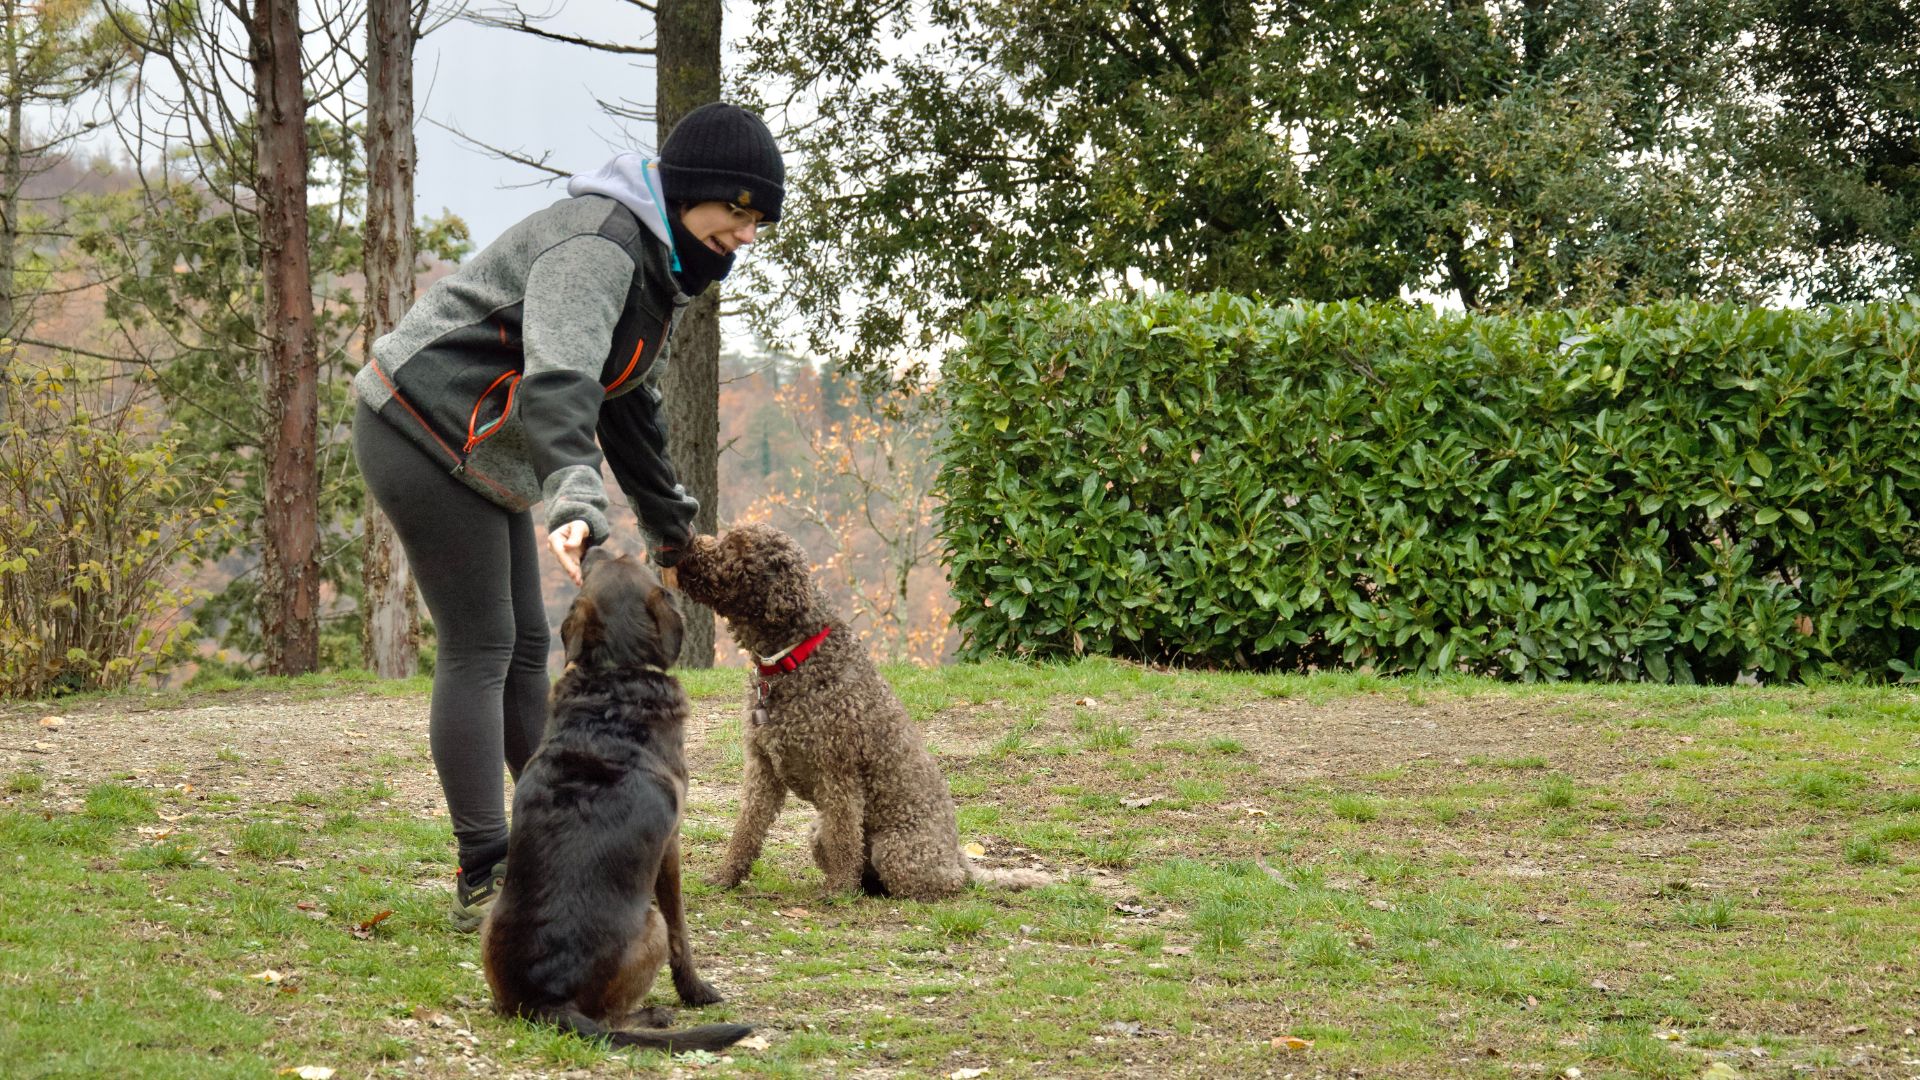 A dog trainer is outdoors with two brown dogs. The trainer is giving the dogs treats, one dog with each hand, as a reward for their work.